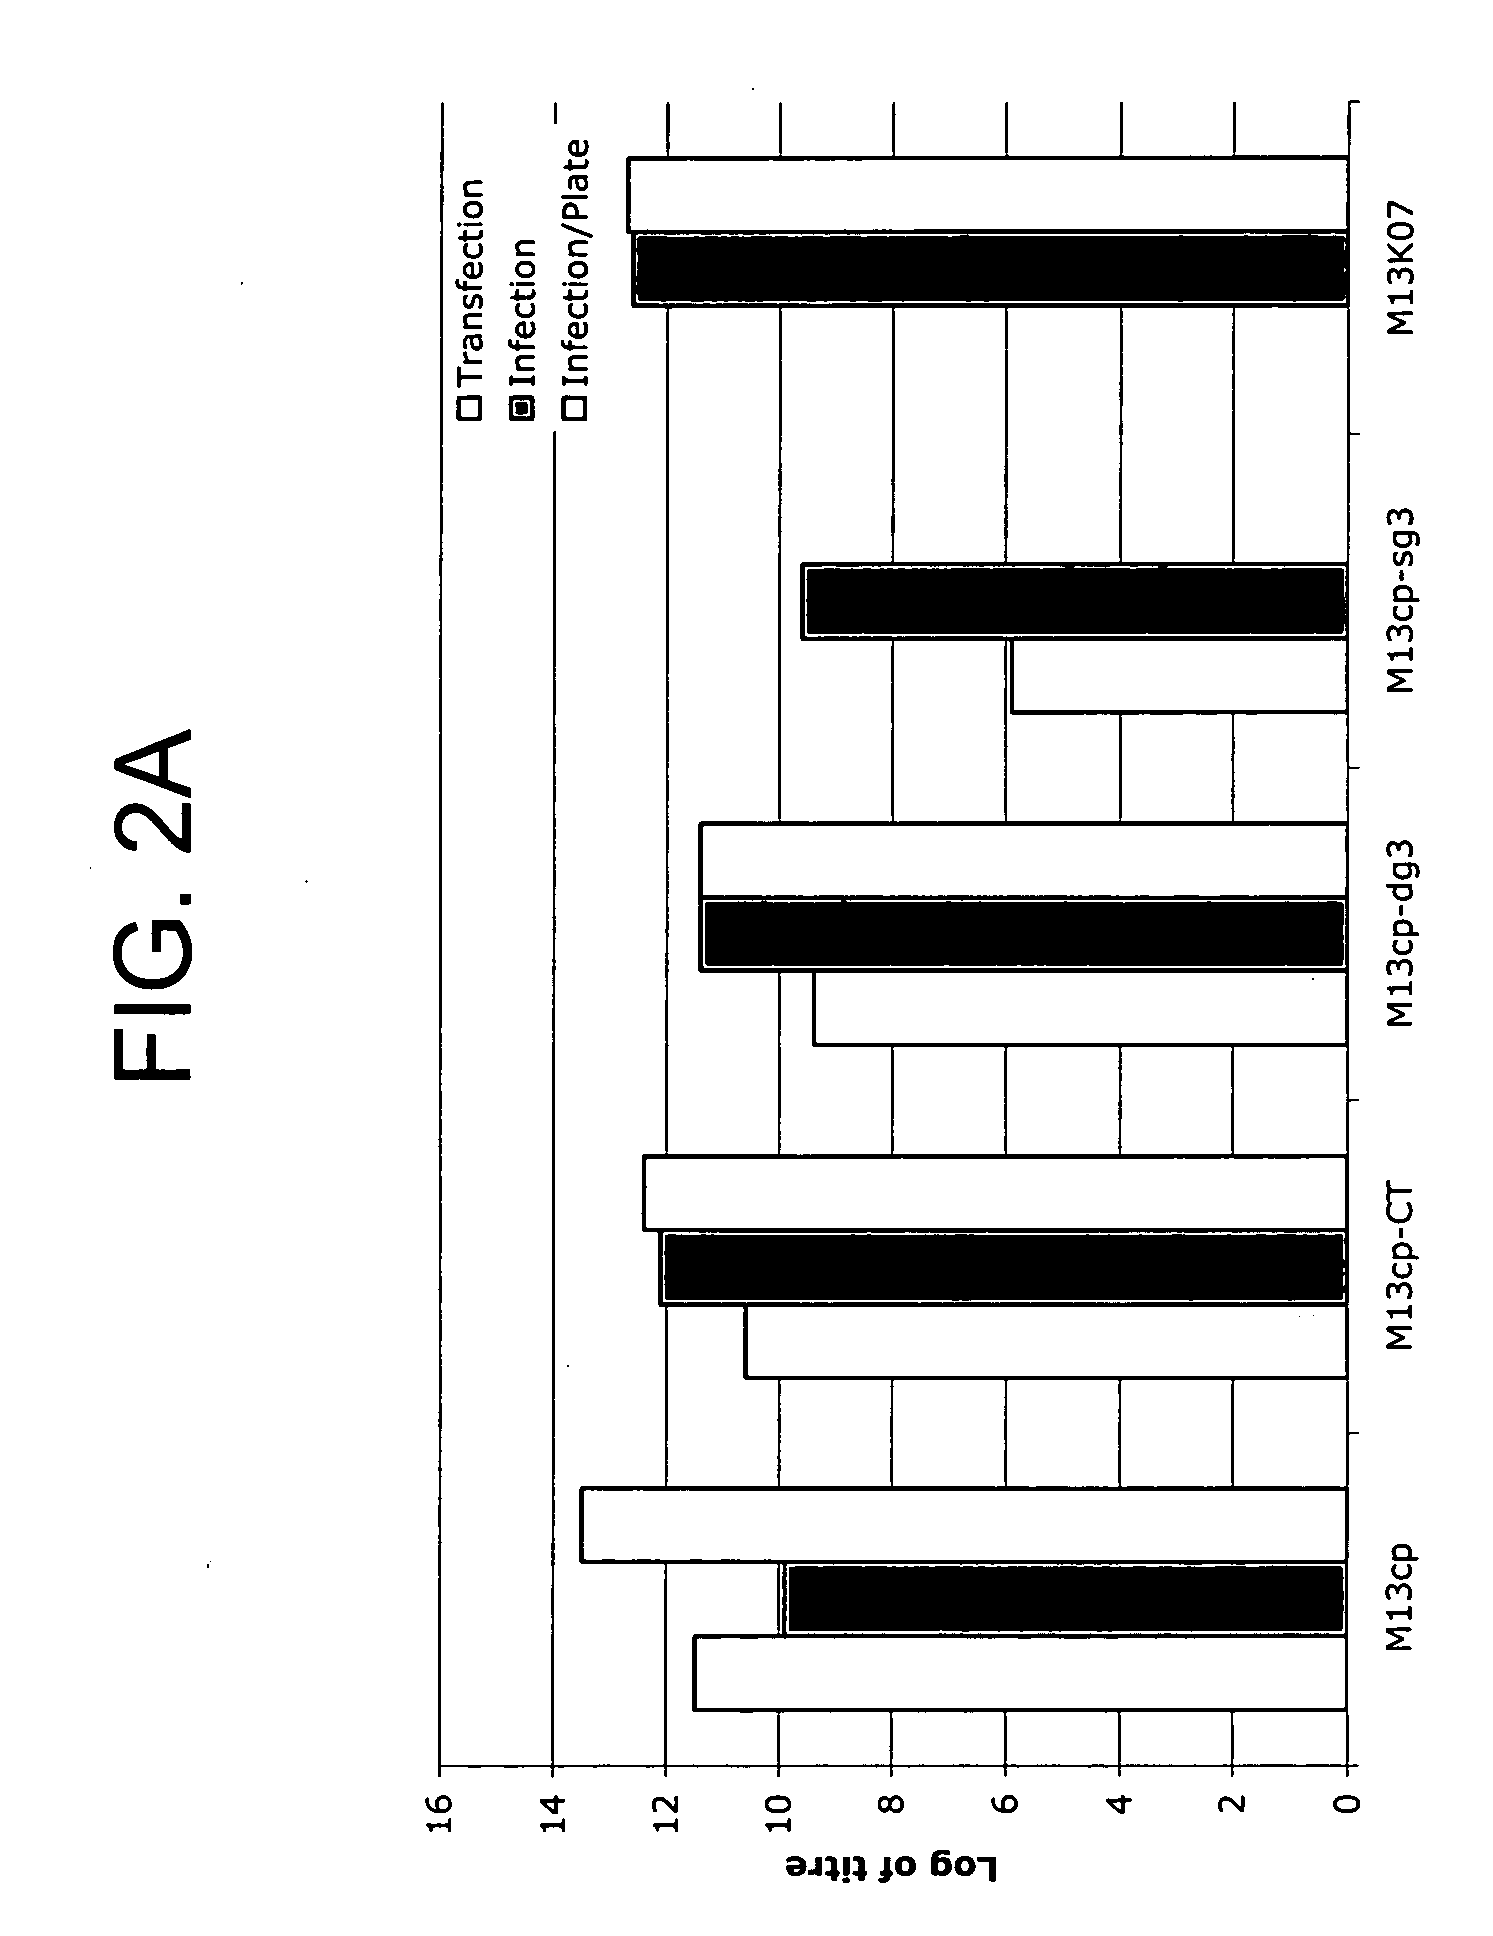 Plasmids and packaging cell lines for use in phage display